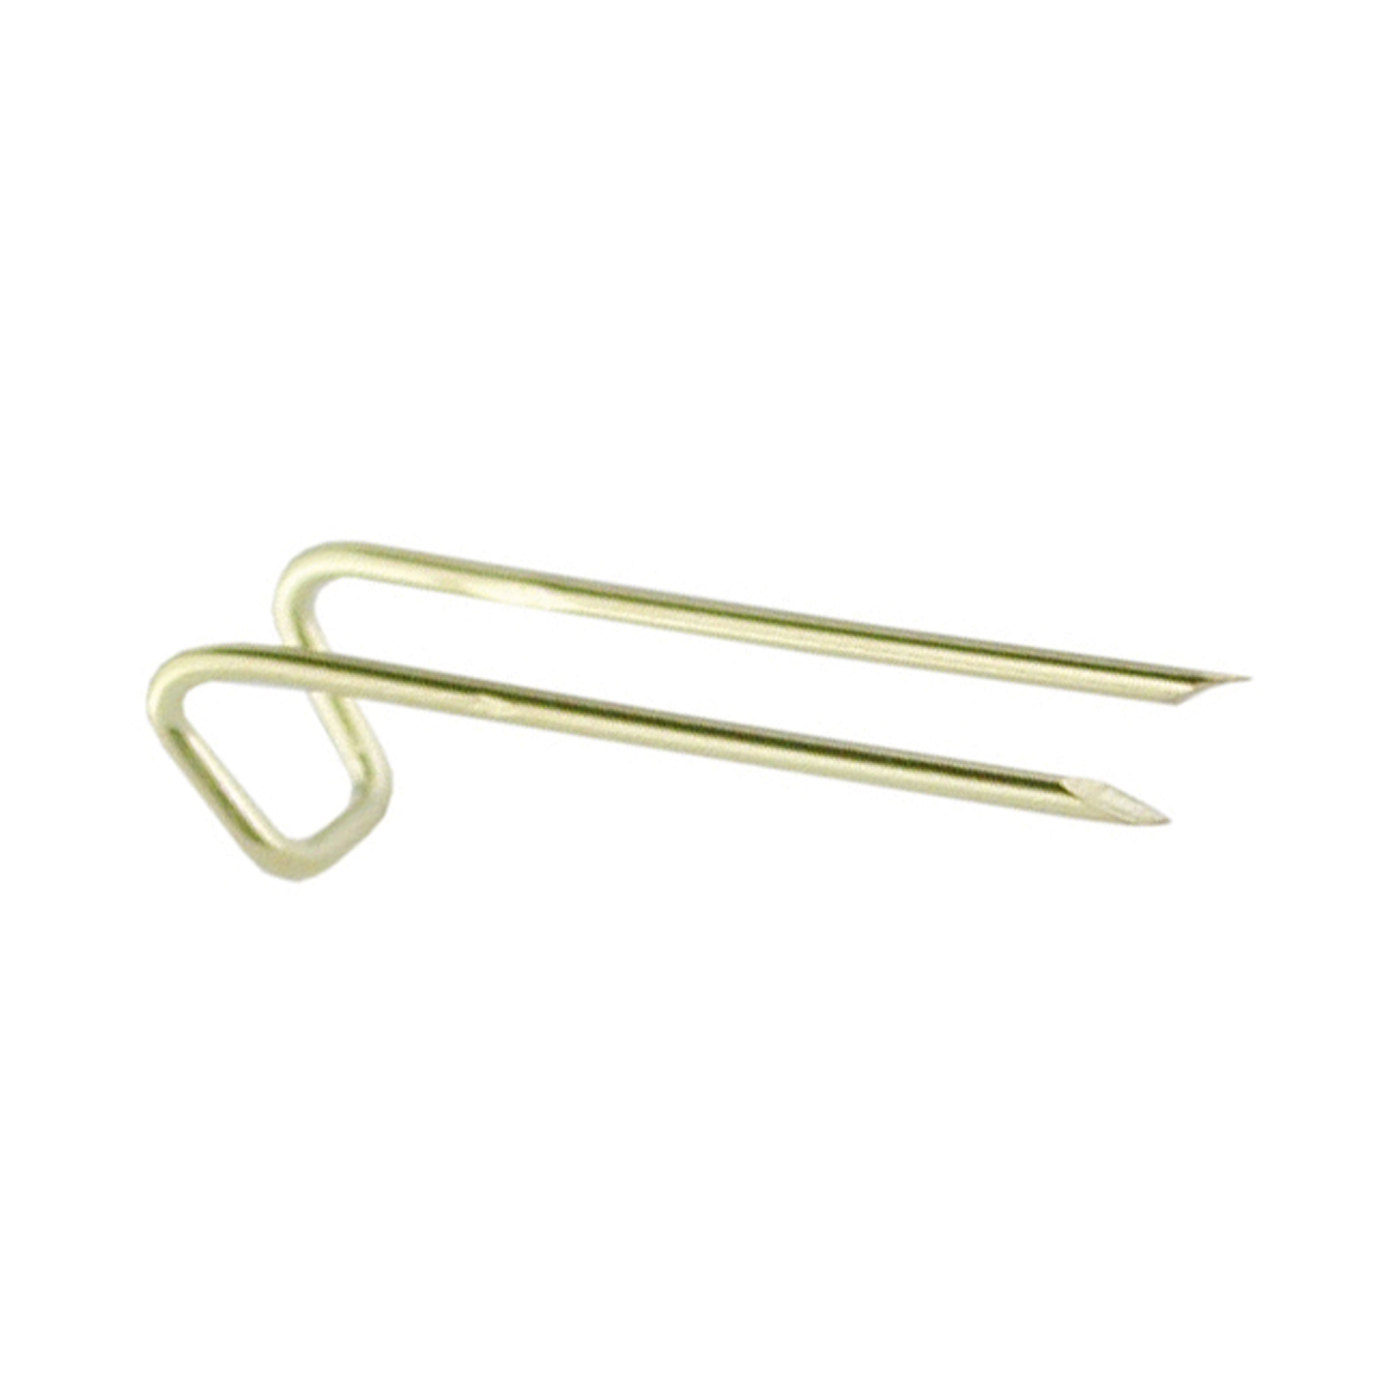 Decoration Needles, Gold-Plated, 19 mm - 100 pieces